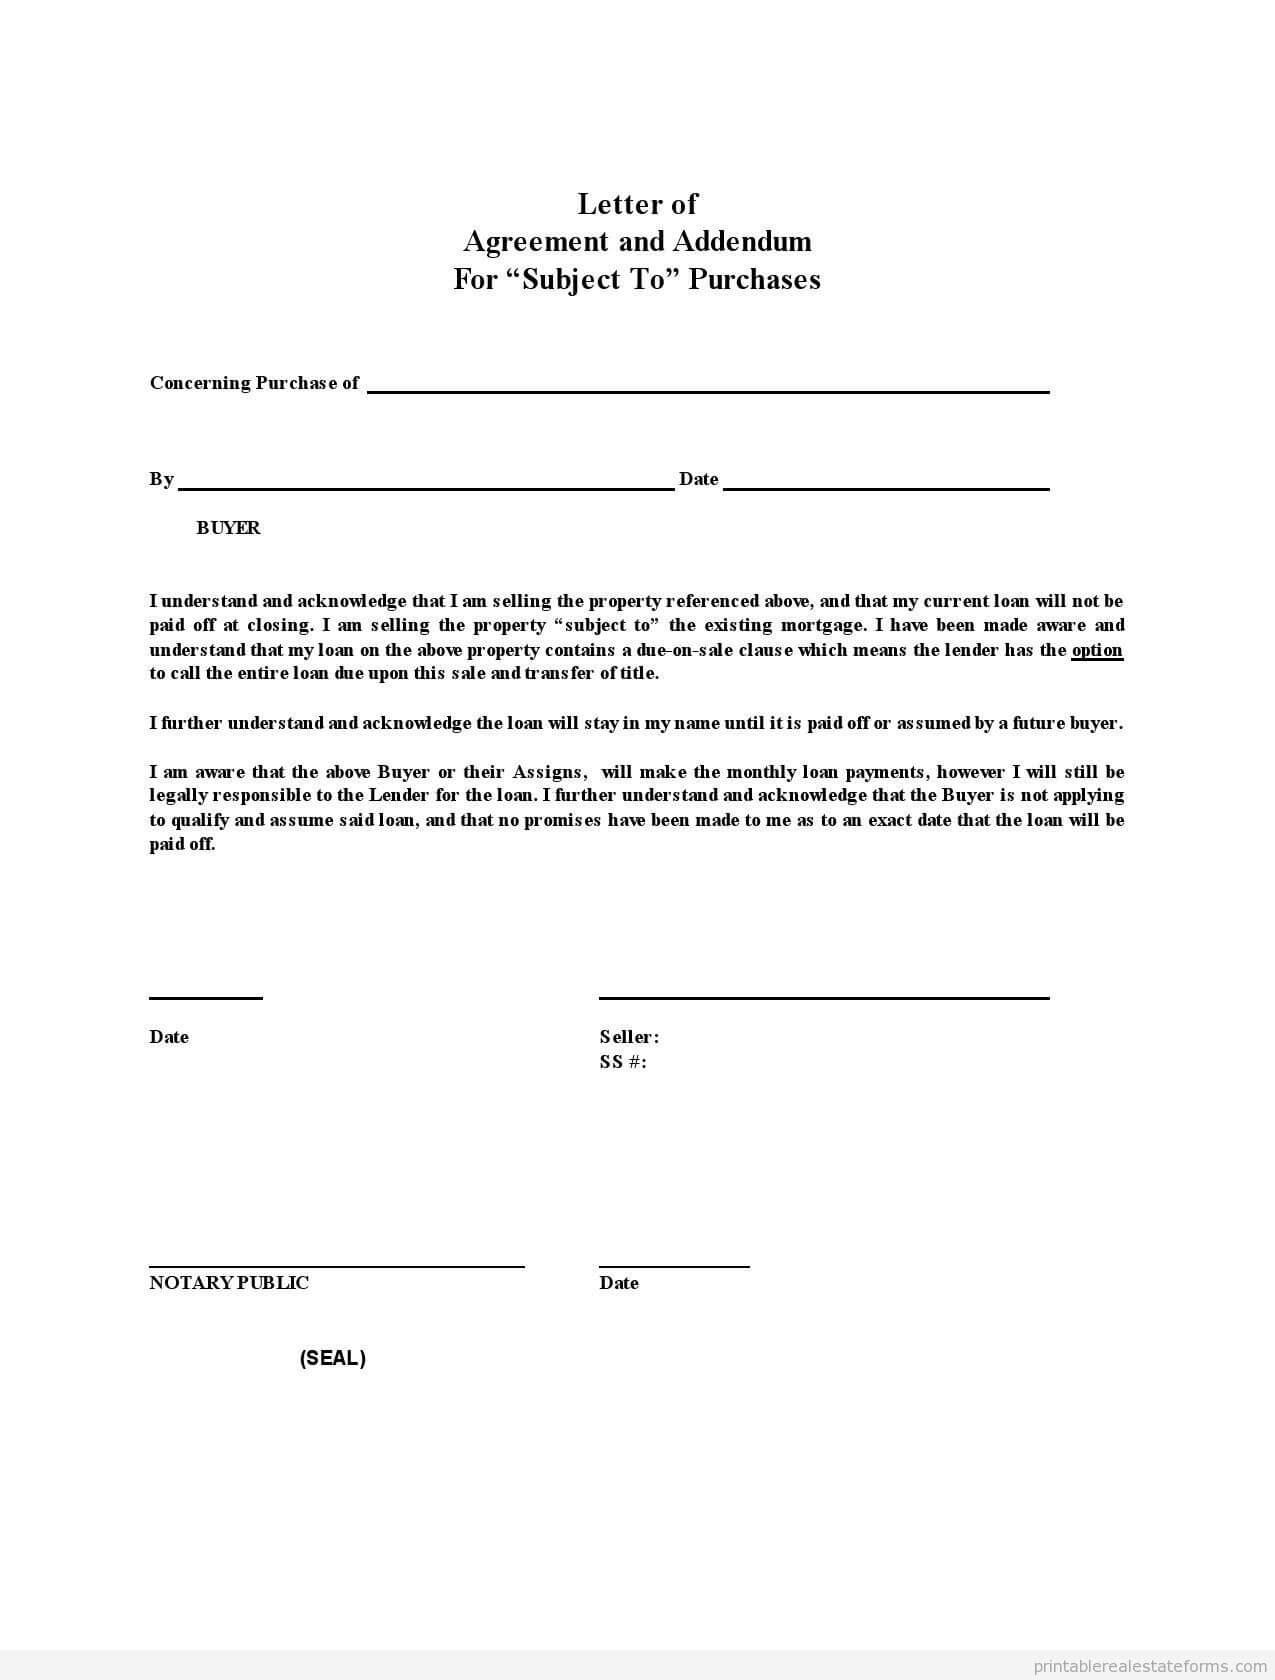 Printable Sample St Letter Of Agreement   Buy Form | Simple With Regard To Blank Legal Document Template